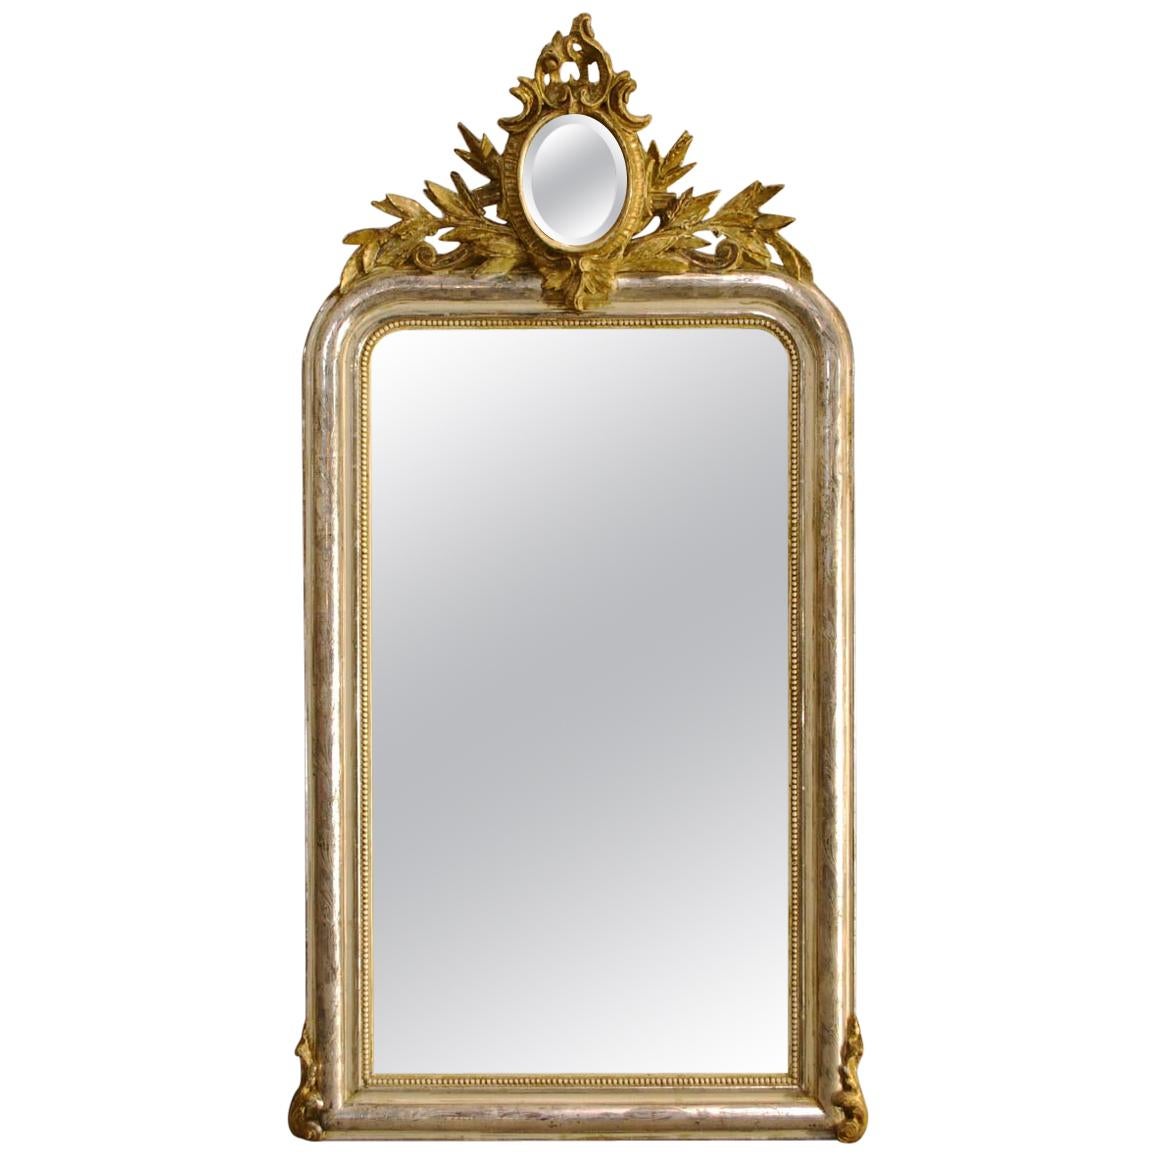 20th Century French Silver Leaf Gilt Mirror and Crest with Oval Mirror